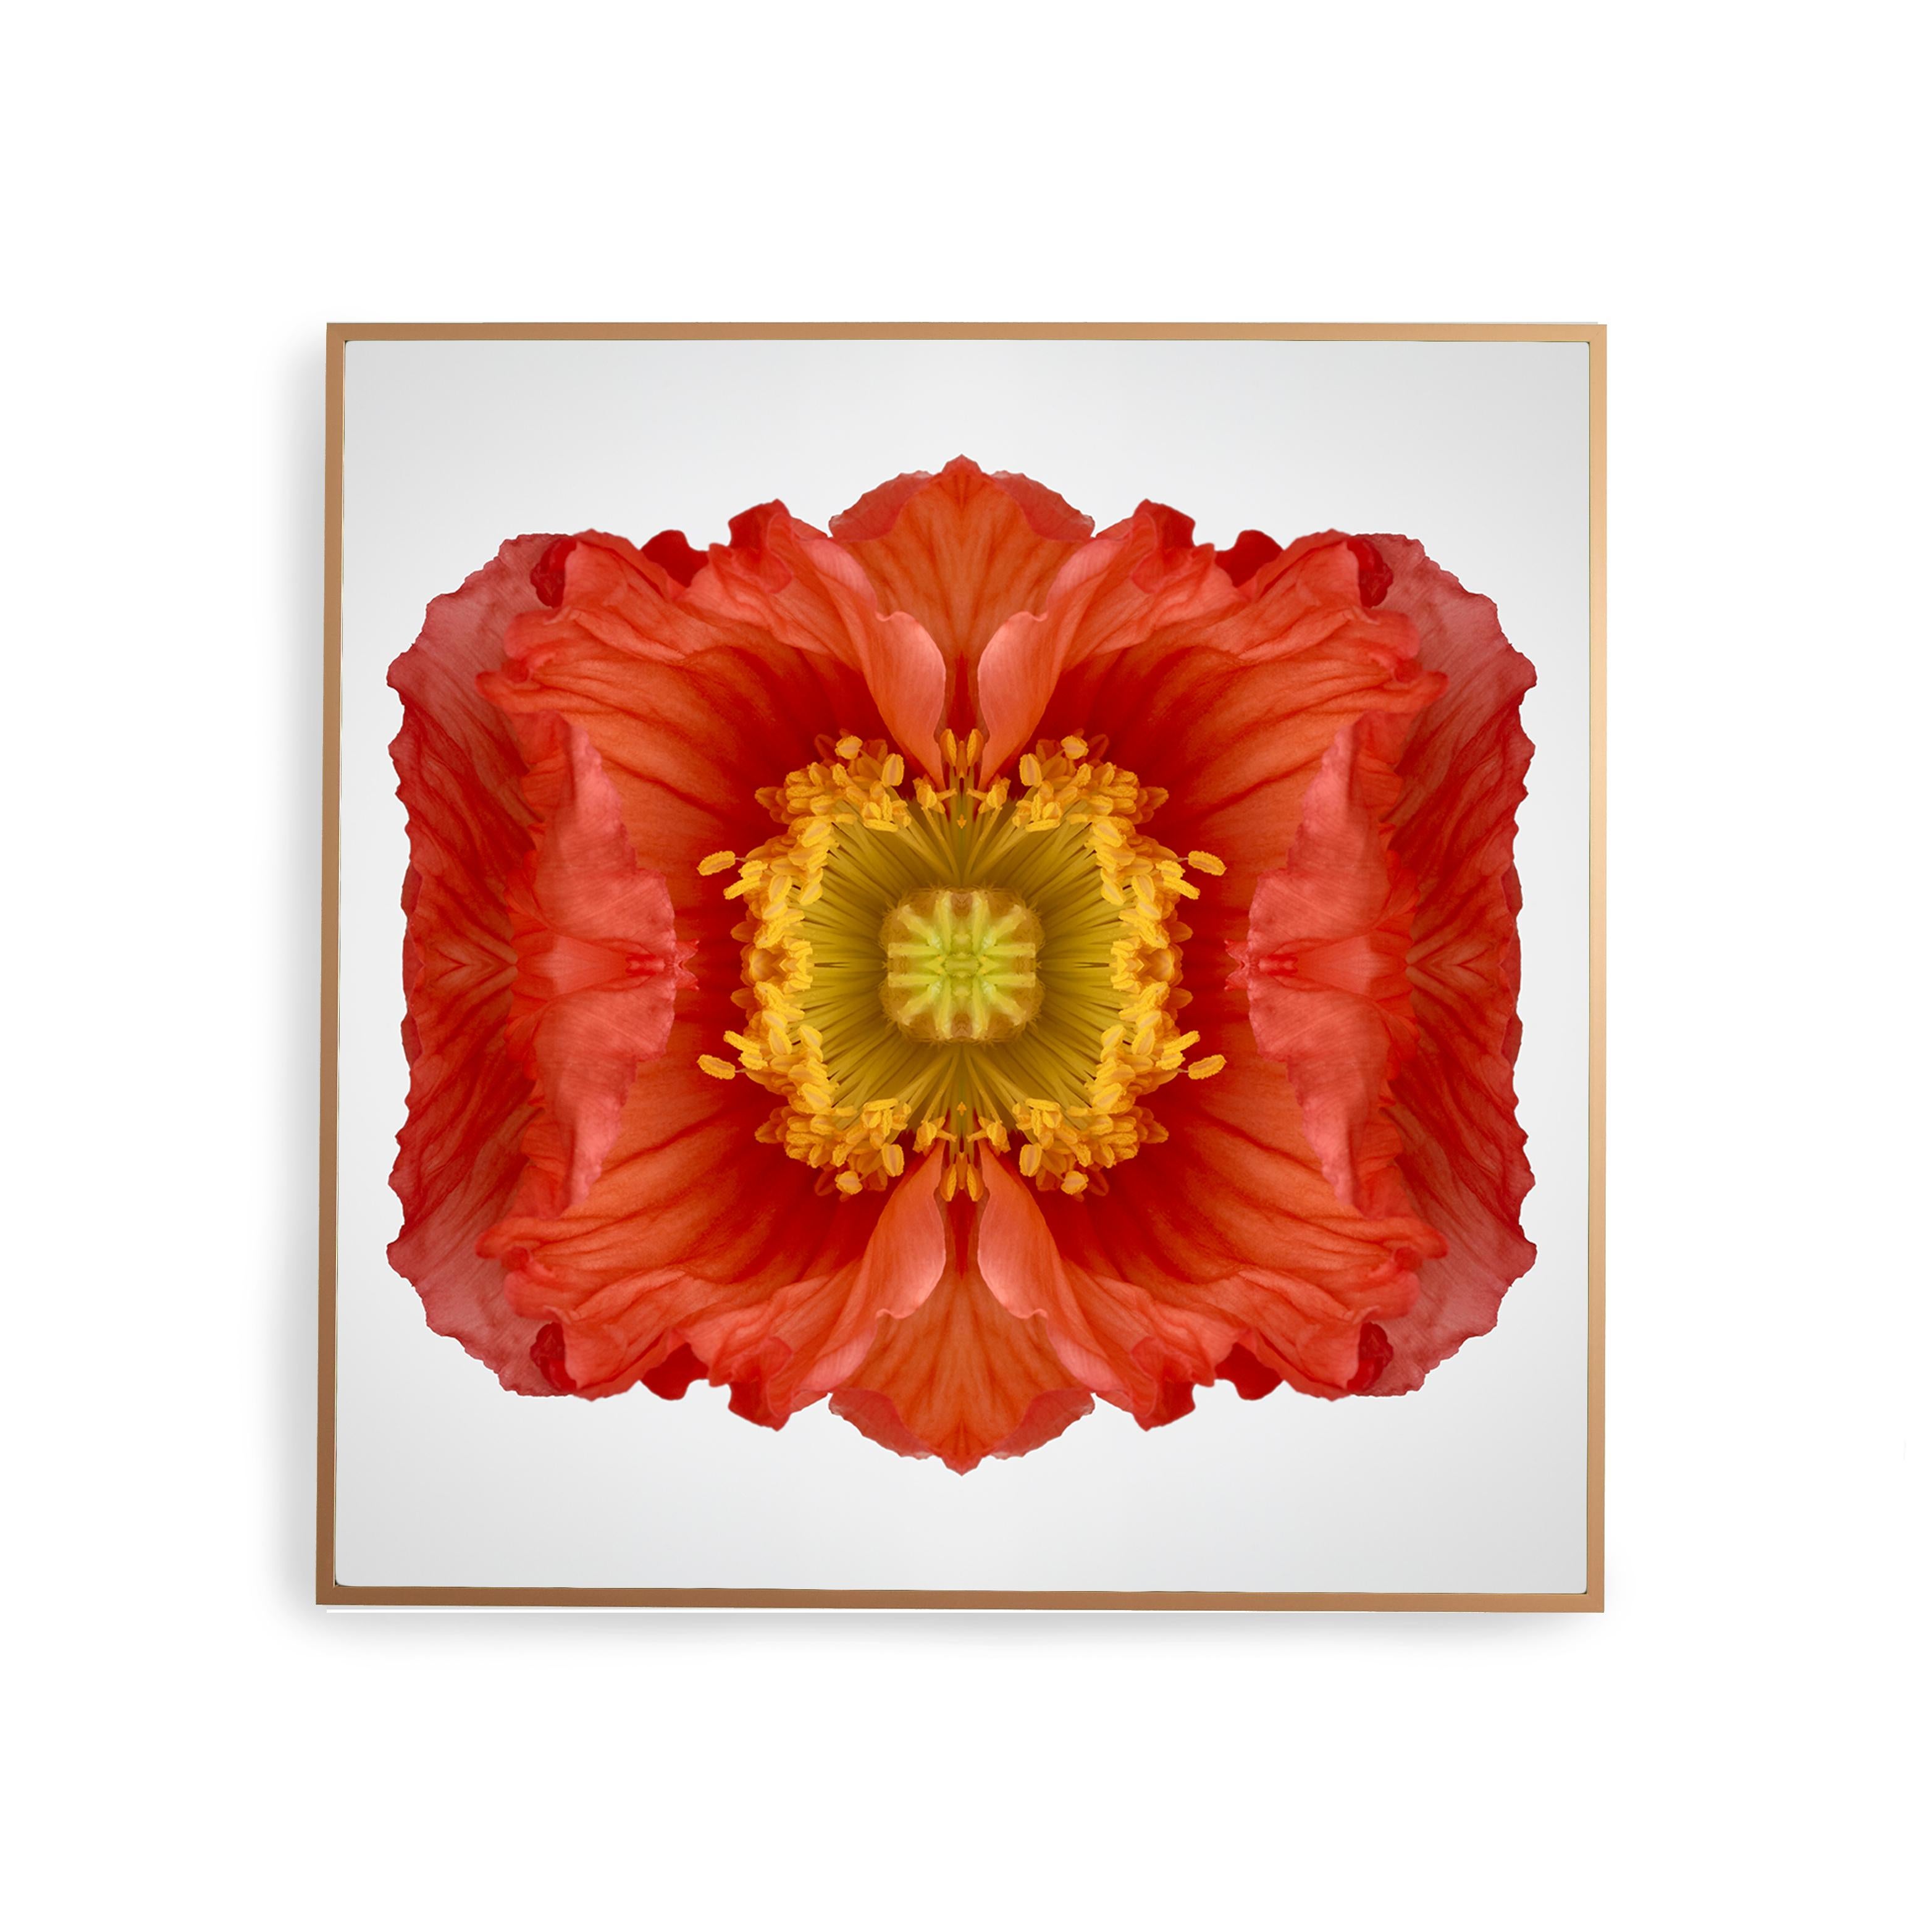 This print features the playful relationship between natural forms and botanicals. In this image Erin uses the natural composition of the bright red orange poppy, and her own collage work, to create a hypnotic mandala with the floral. Some describe